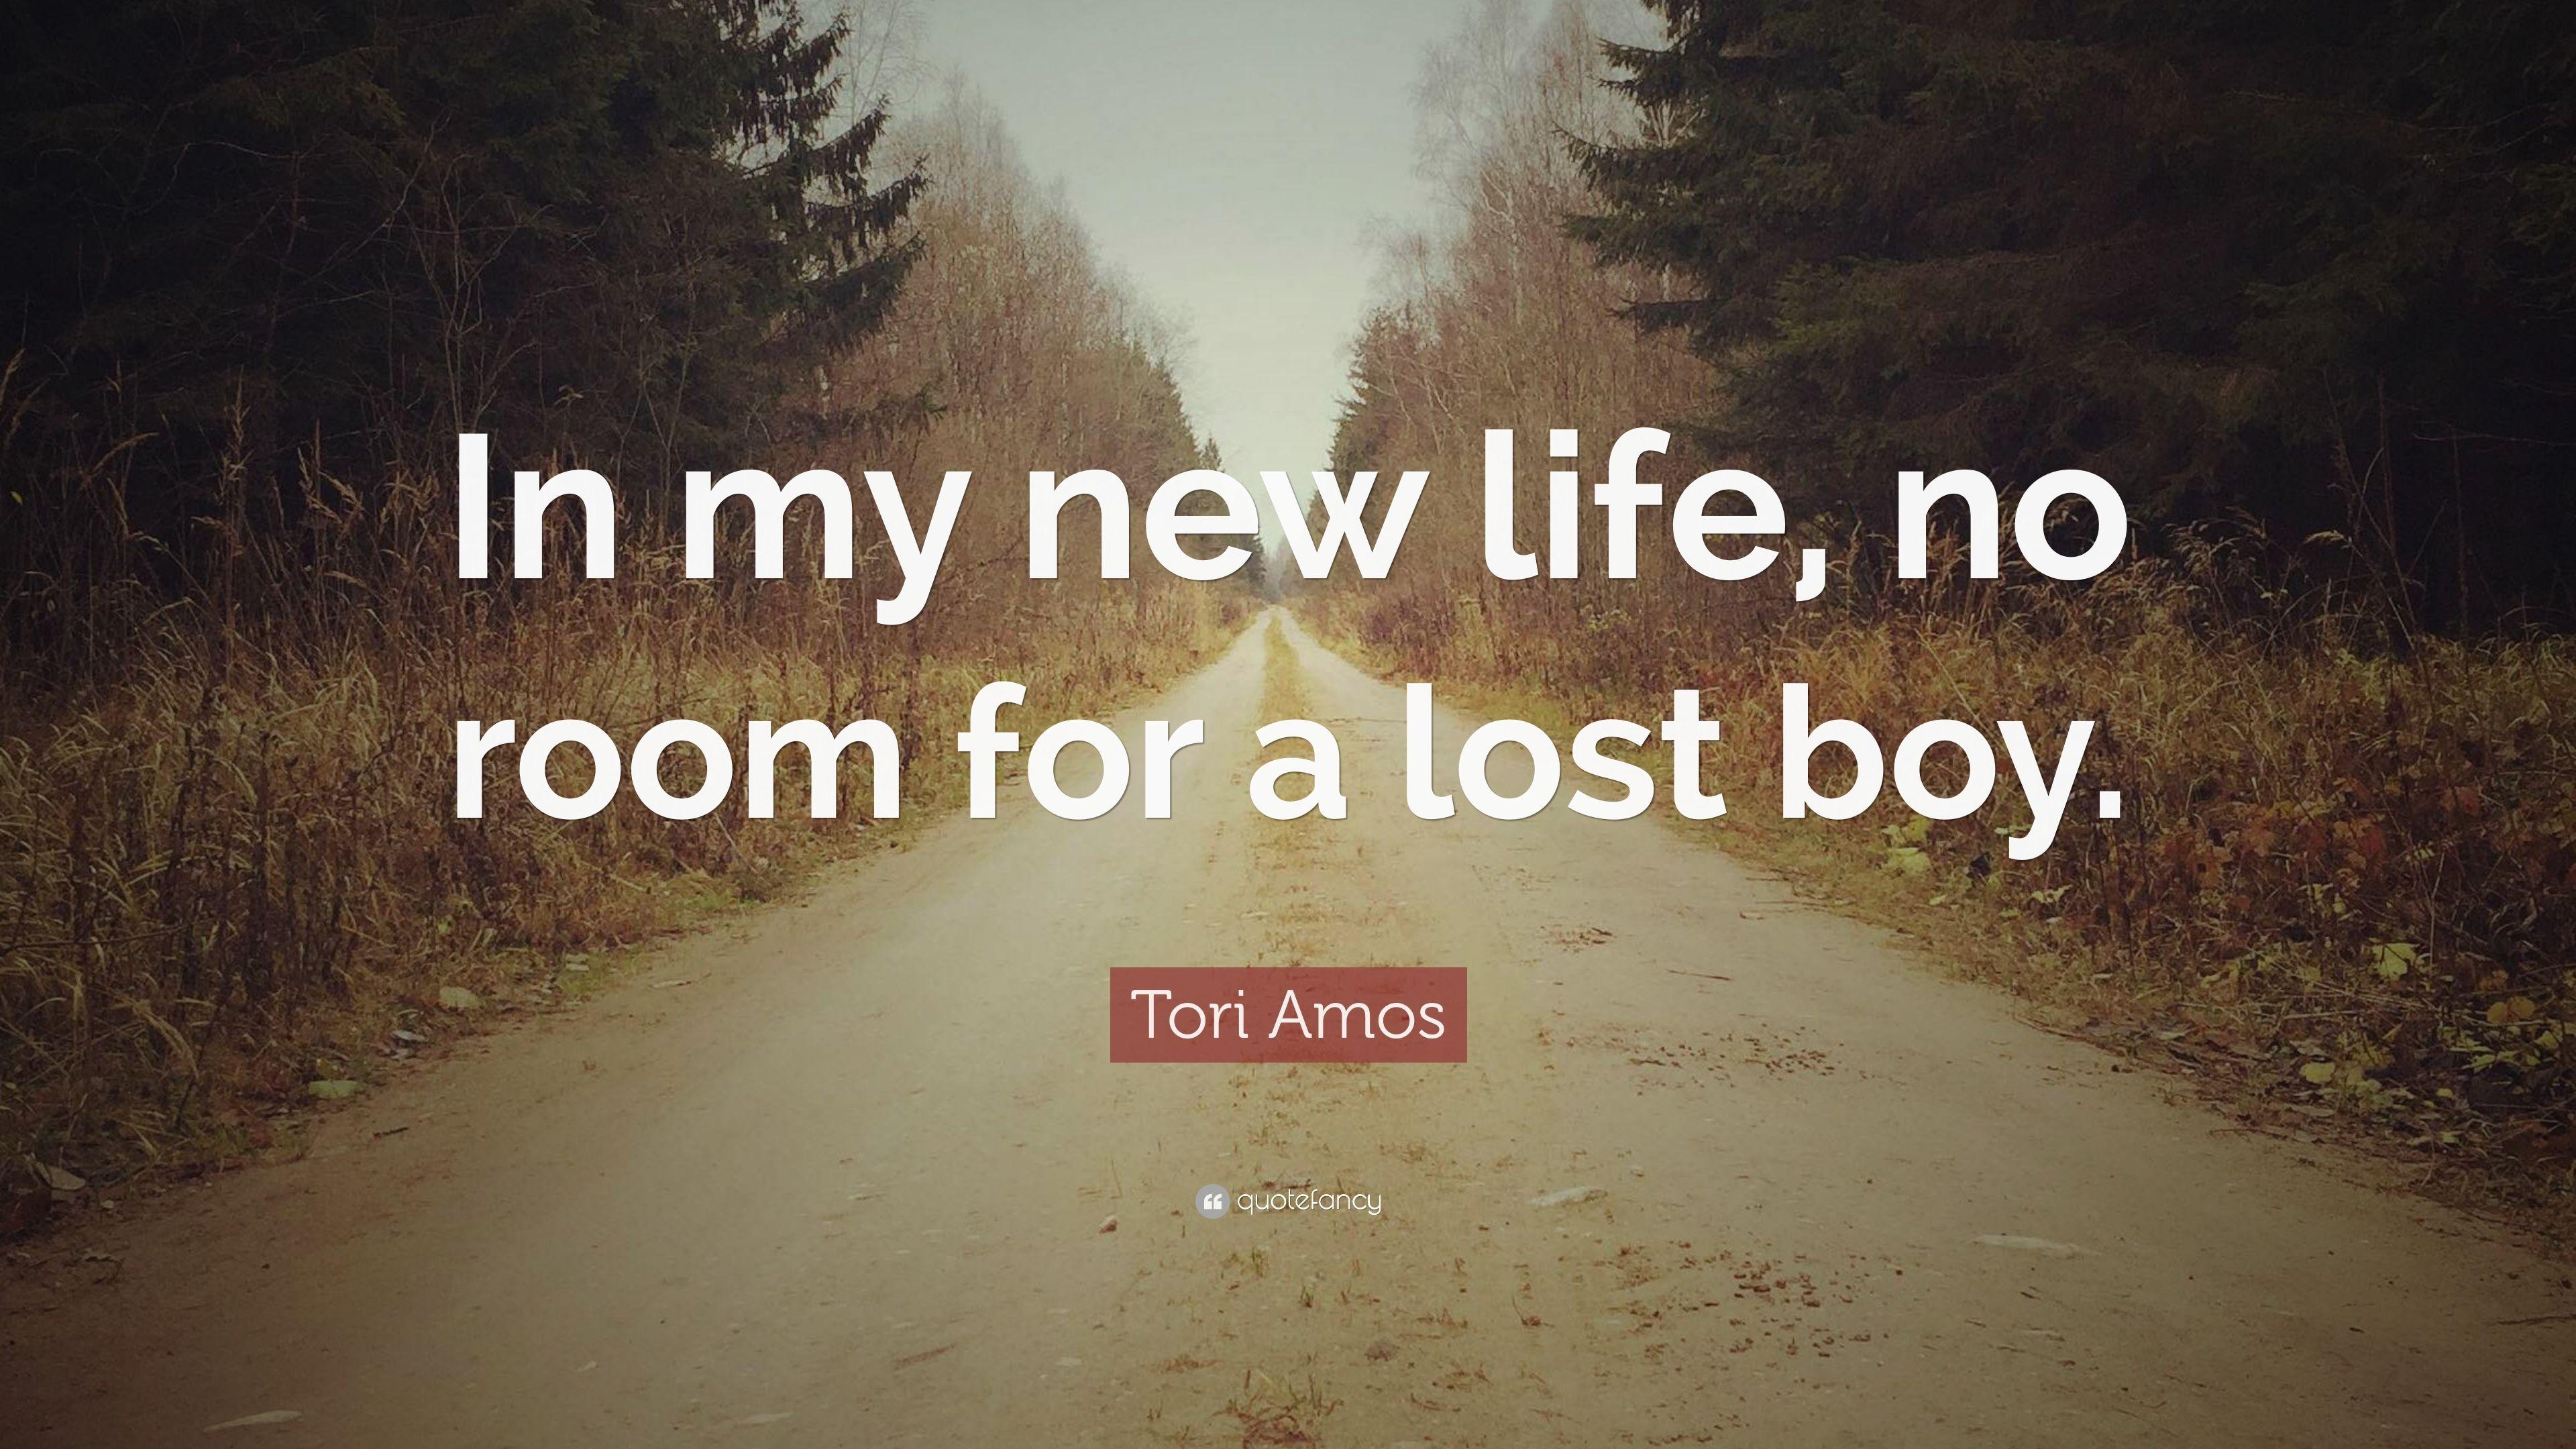 Tori Amos Quote: “In my new life, no room for a lost boy.” 9